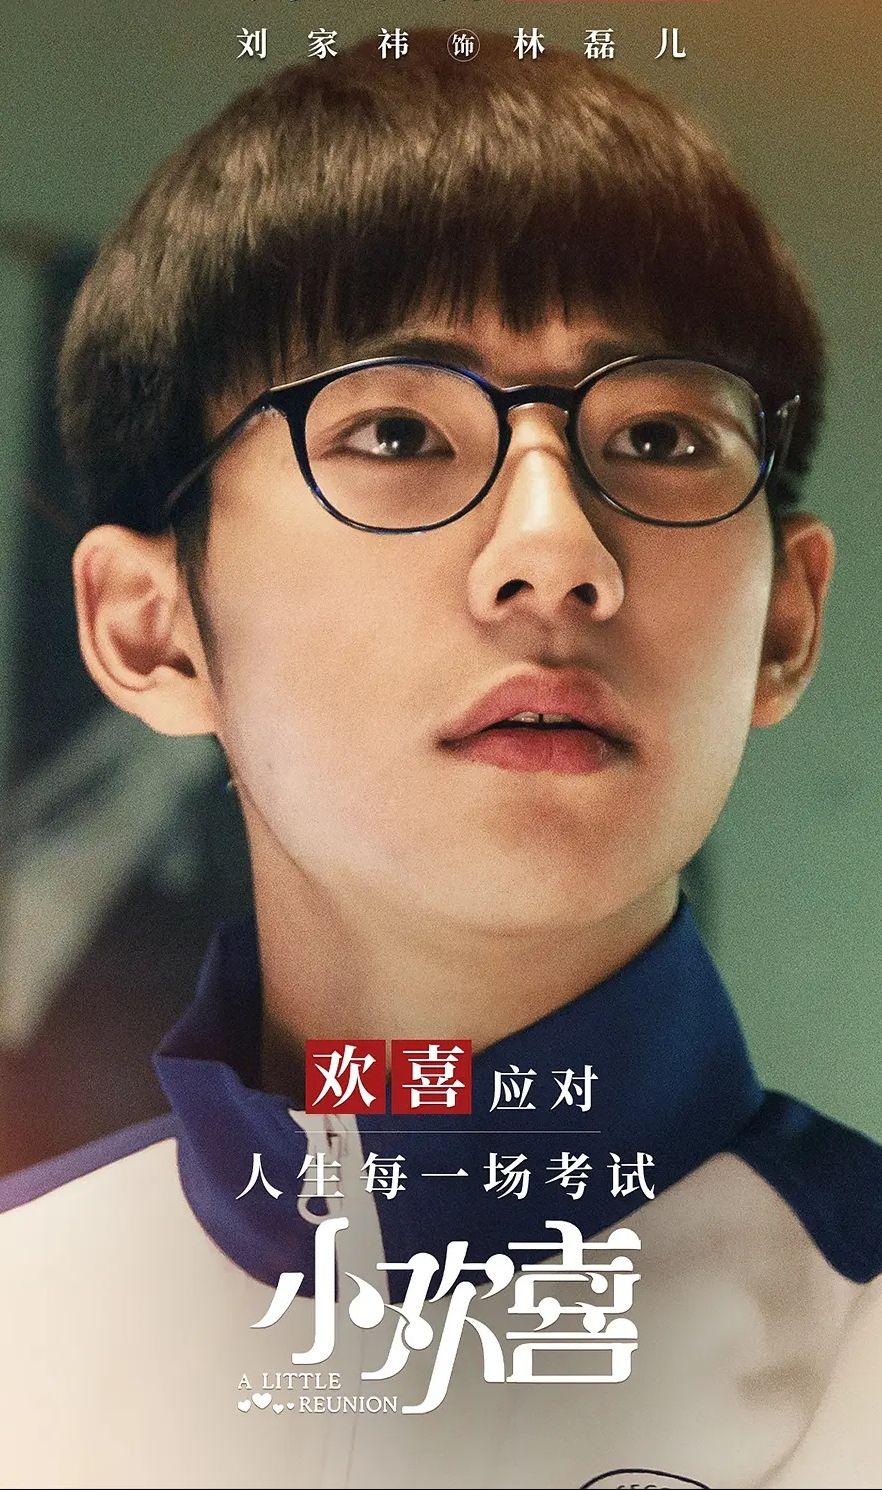 " small jubilate " Guan Xuan the 2nd, the the old cast renews leading edge, nanjing love story is done